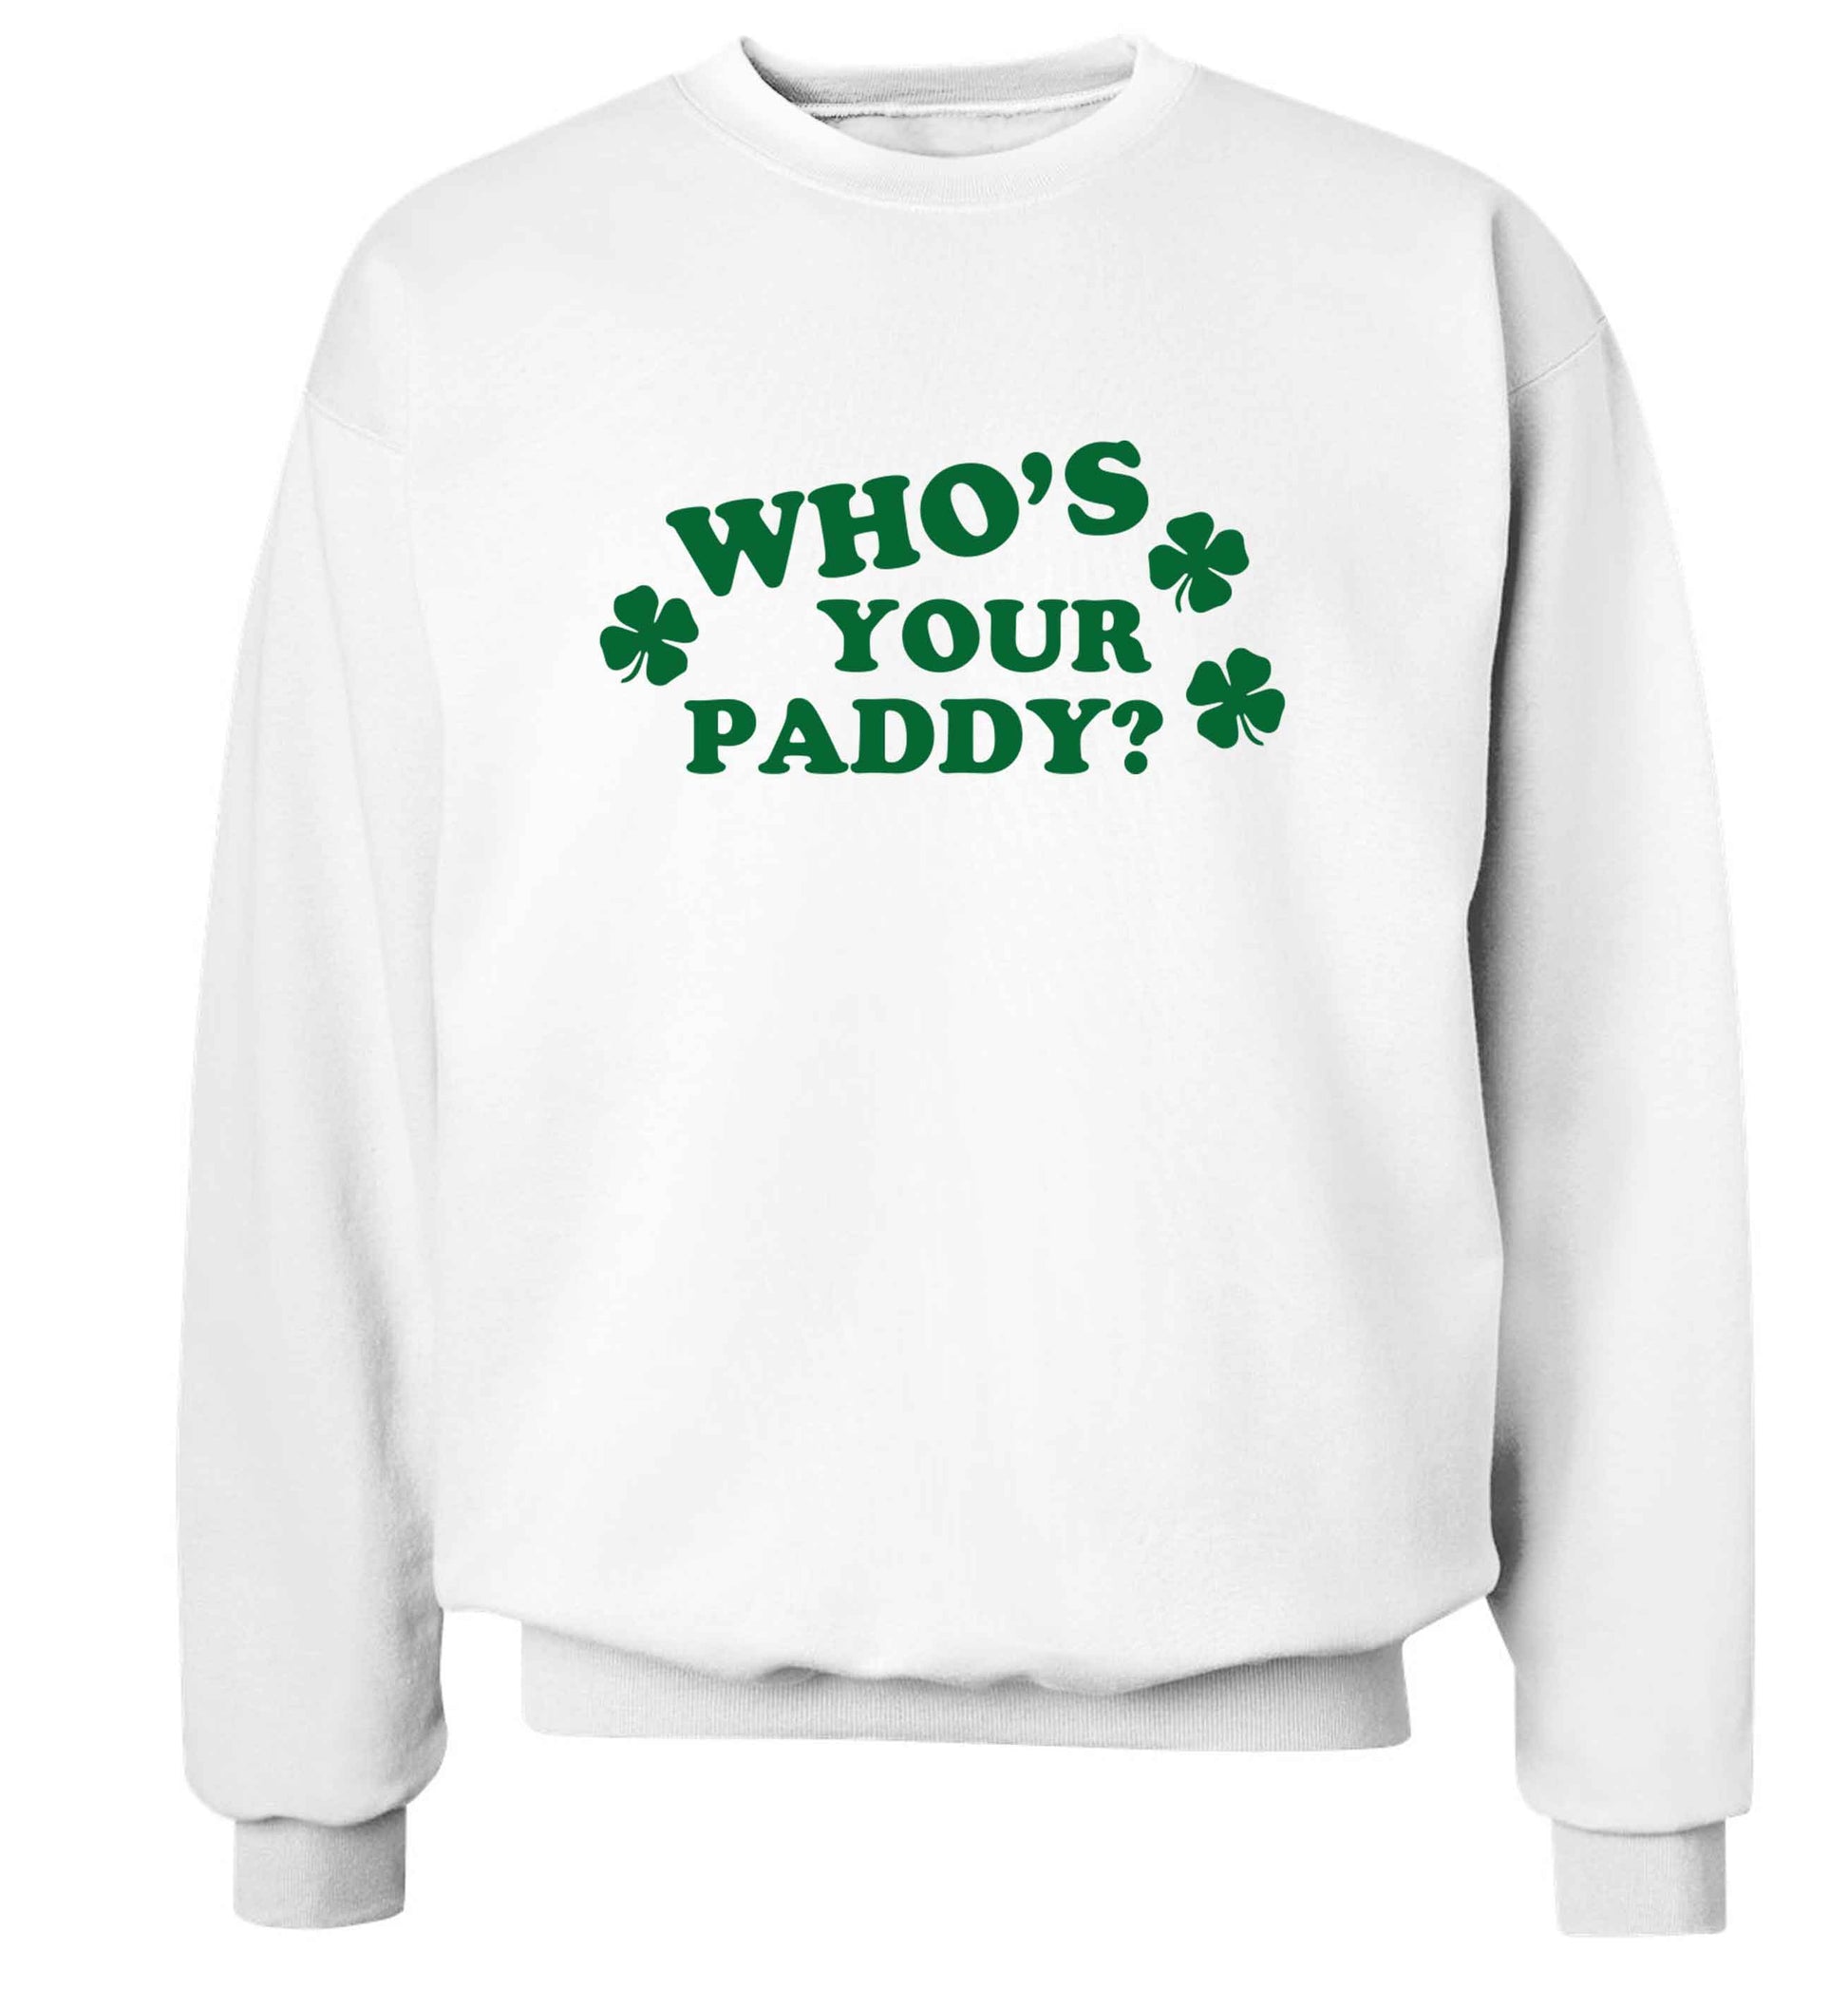 Who's your paddy? adult's unisex white sweater 2XL